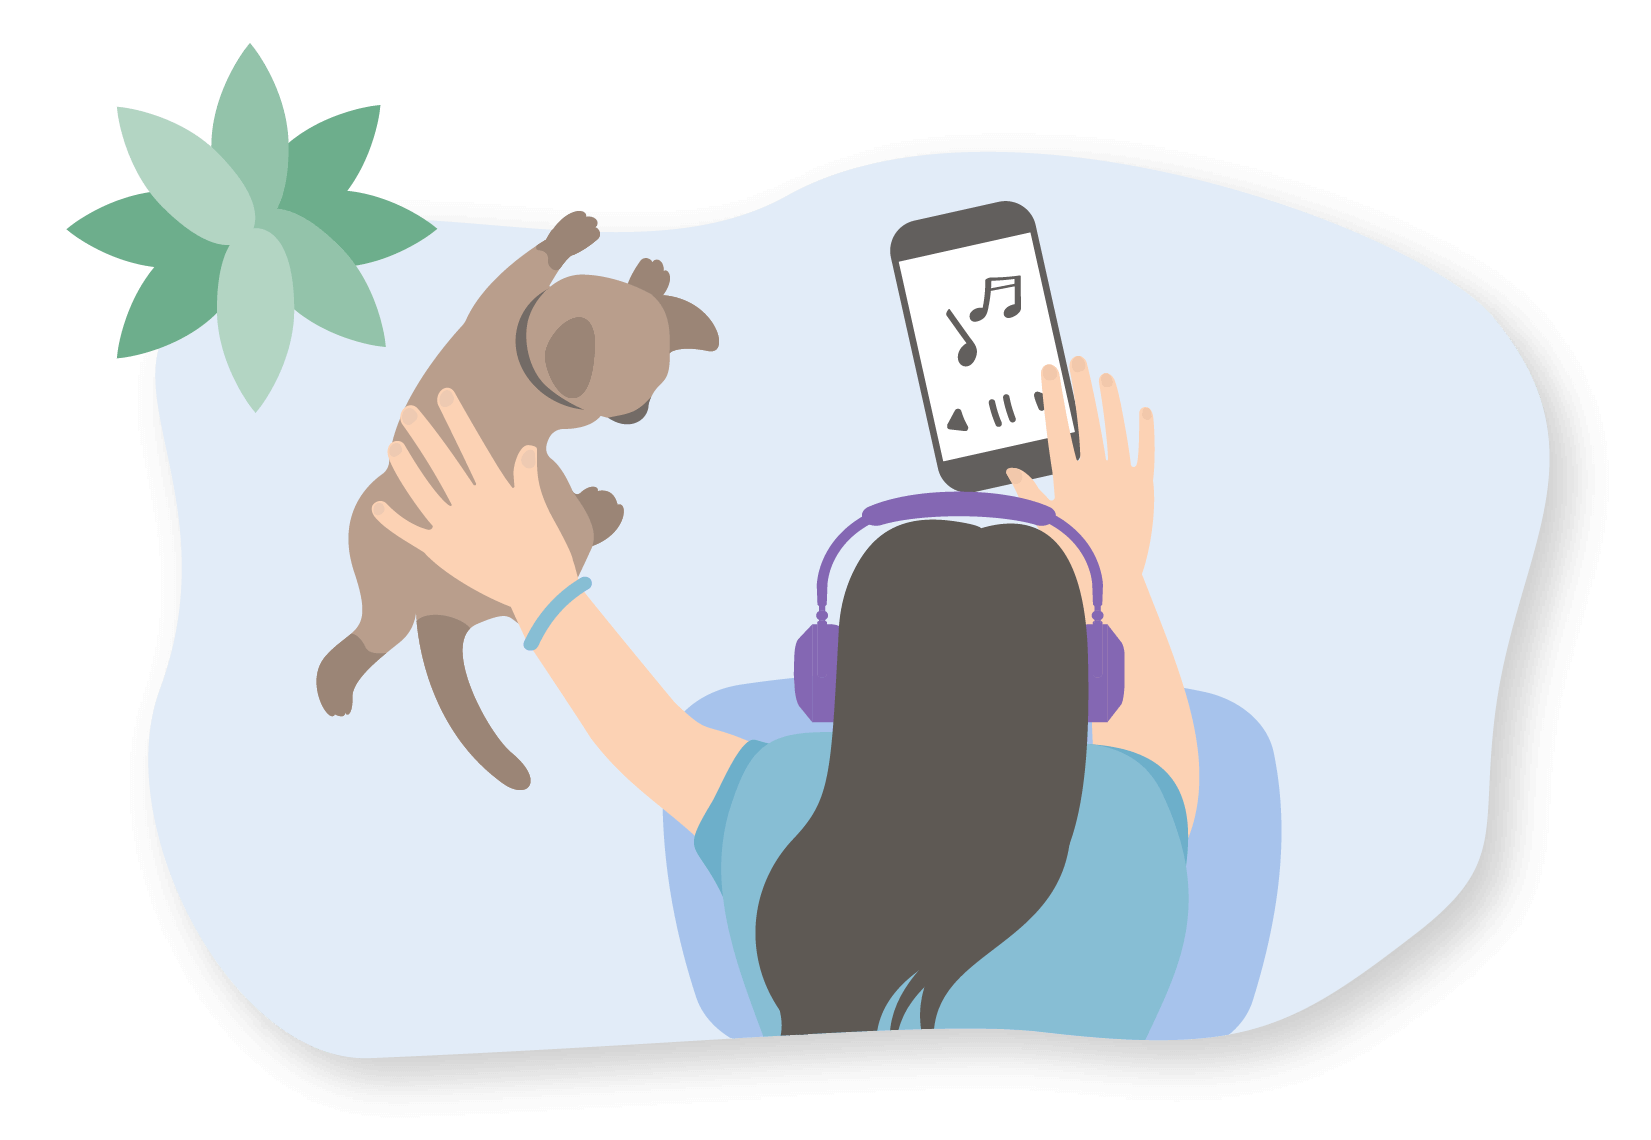 Illustration of a young person listening to music and petting a cat